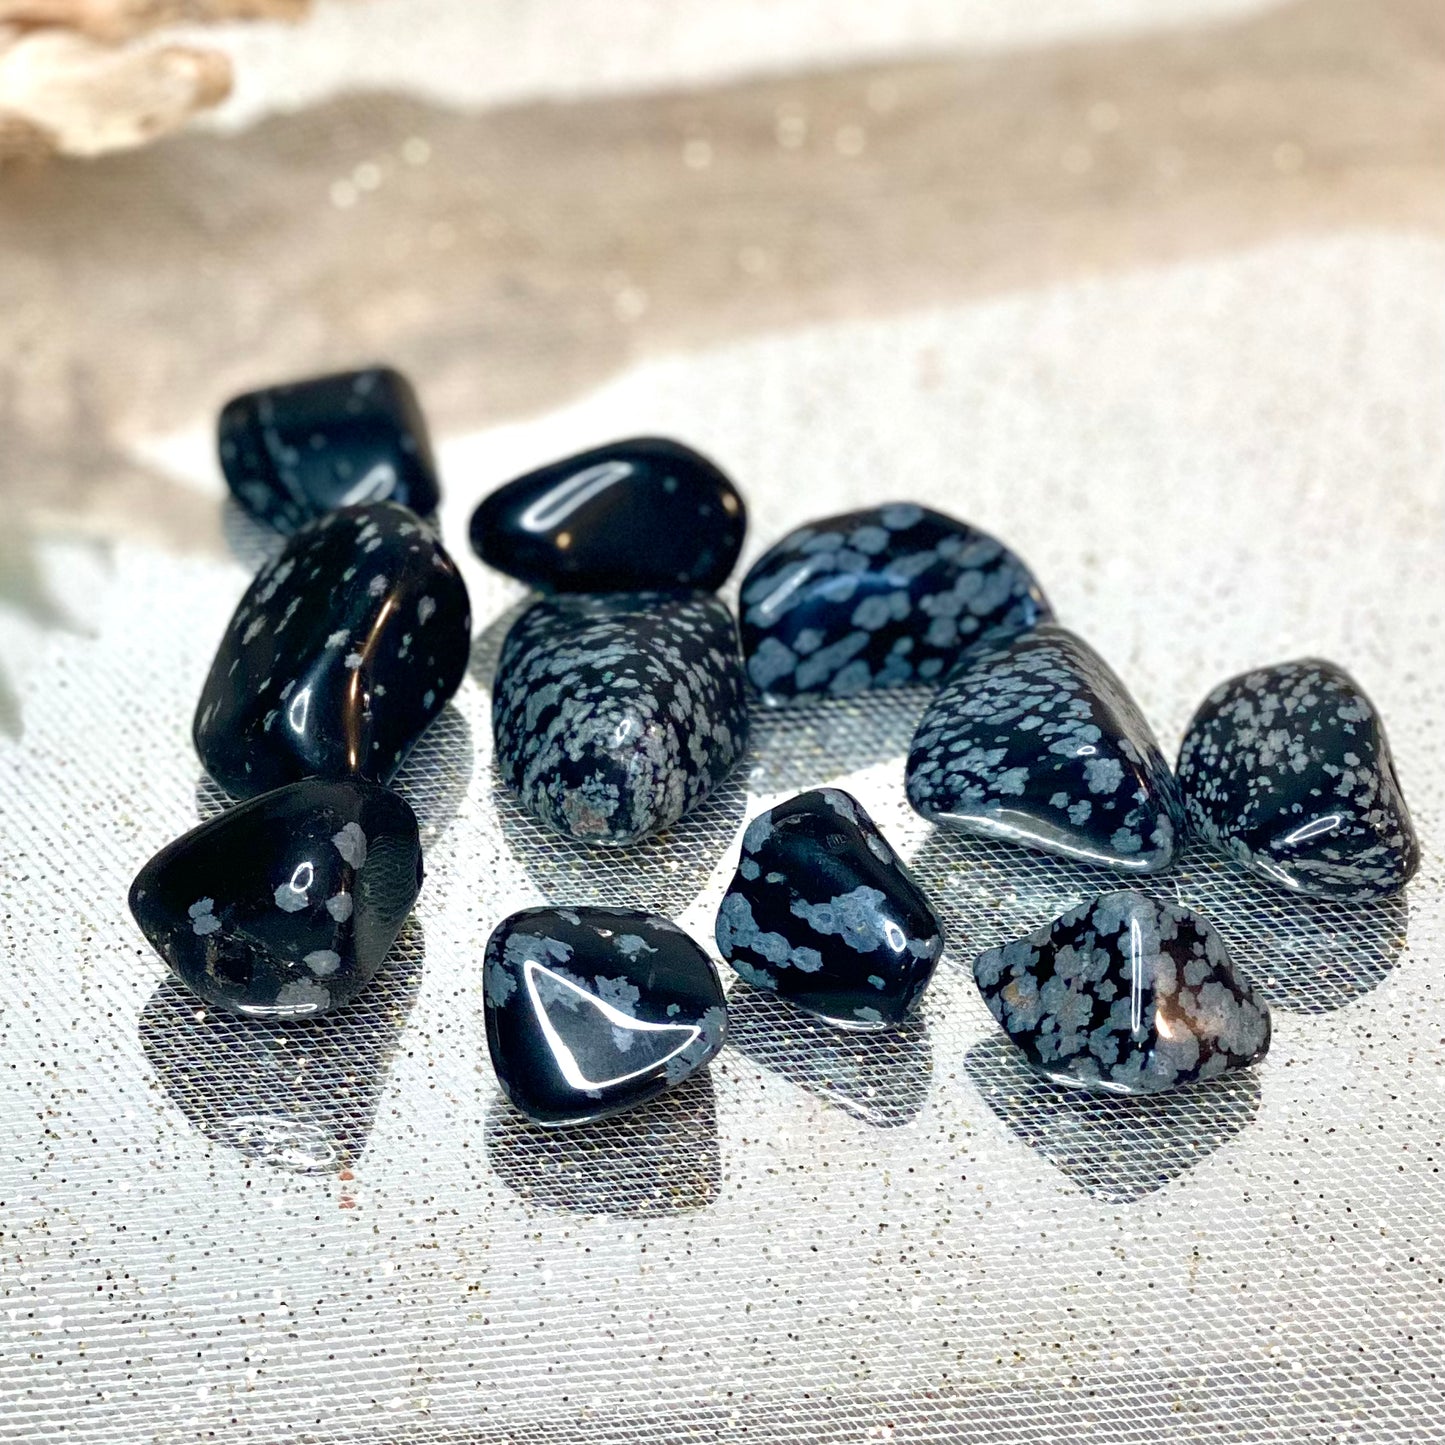 Snowflake Obsidian Tumbled: Grounding and Transformational Natural Gemstone